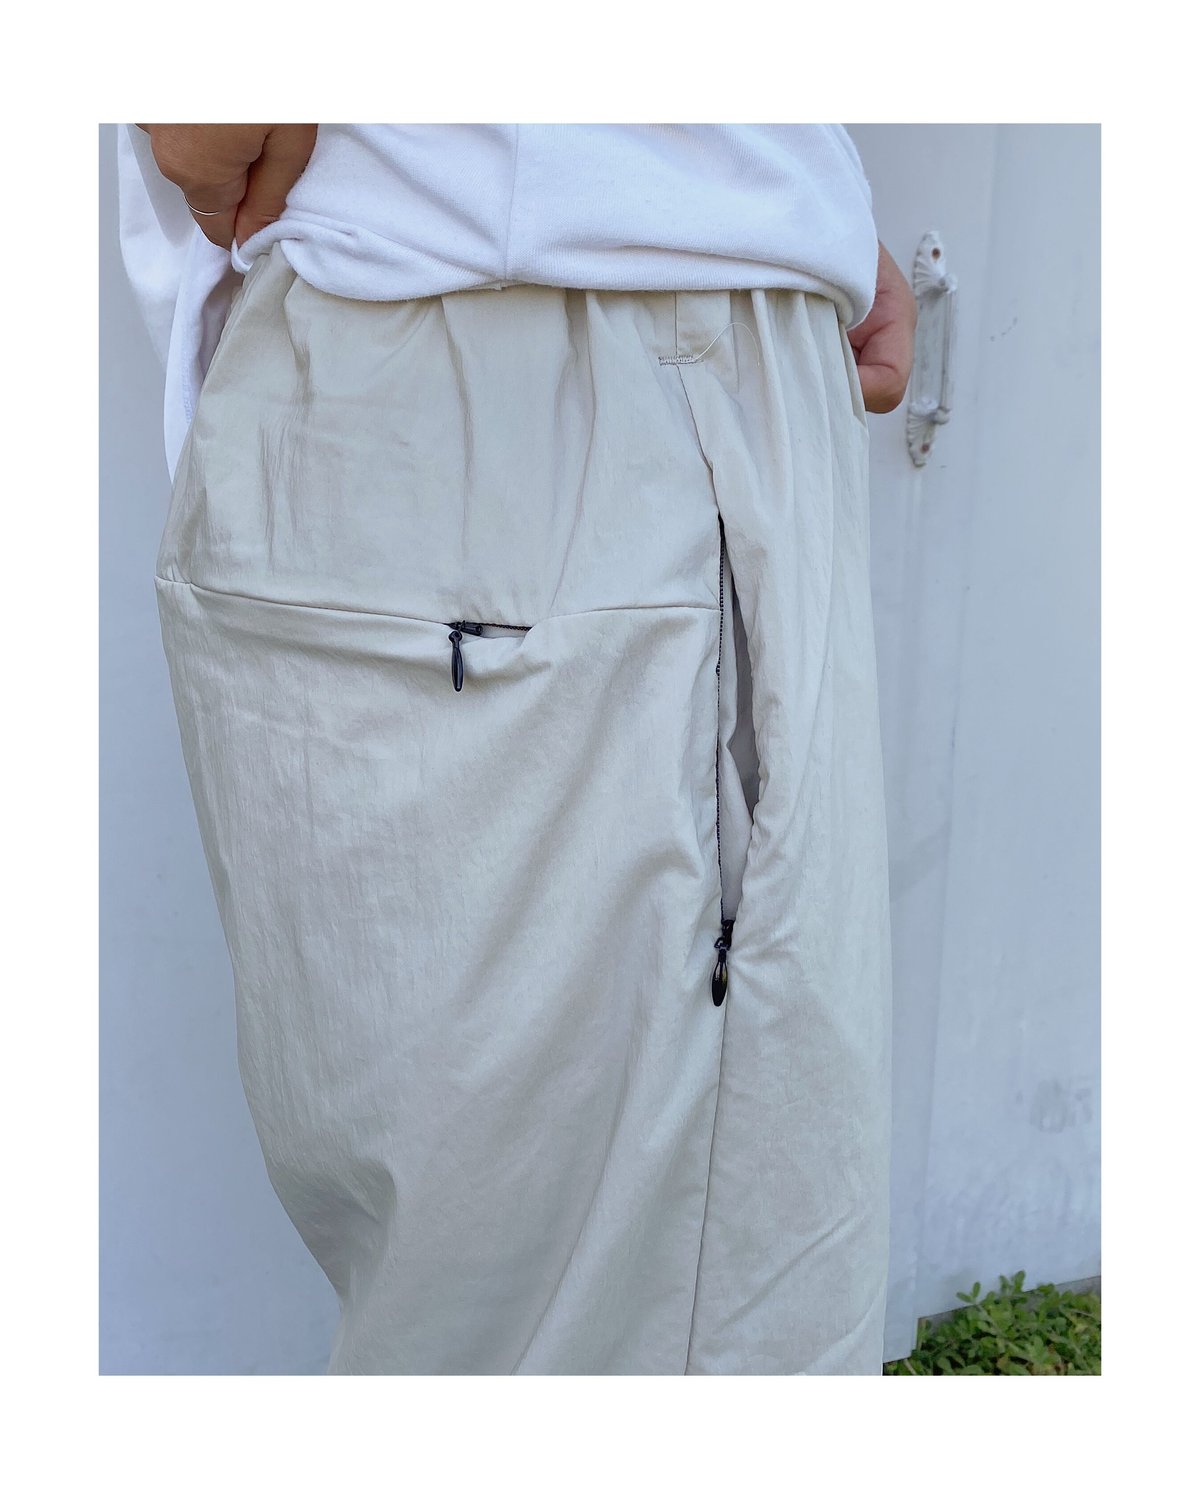 PHINGERIN 「STRETCHY PANTS FLASH」ivory.